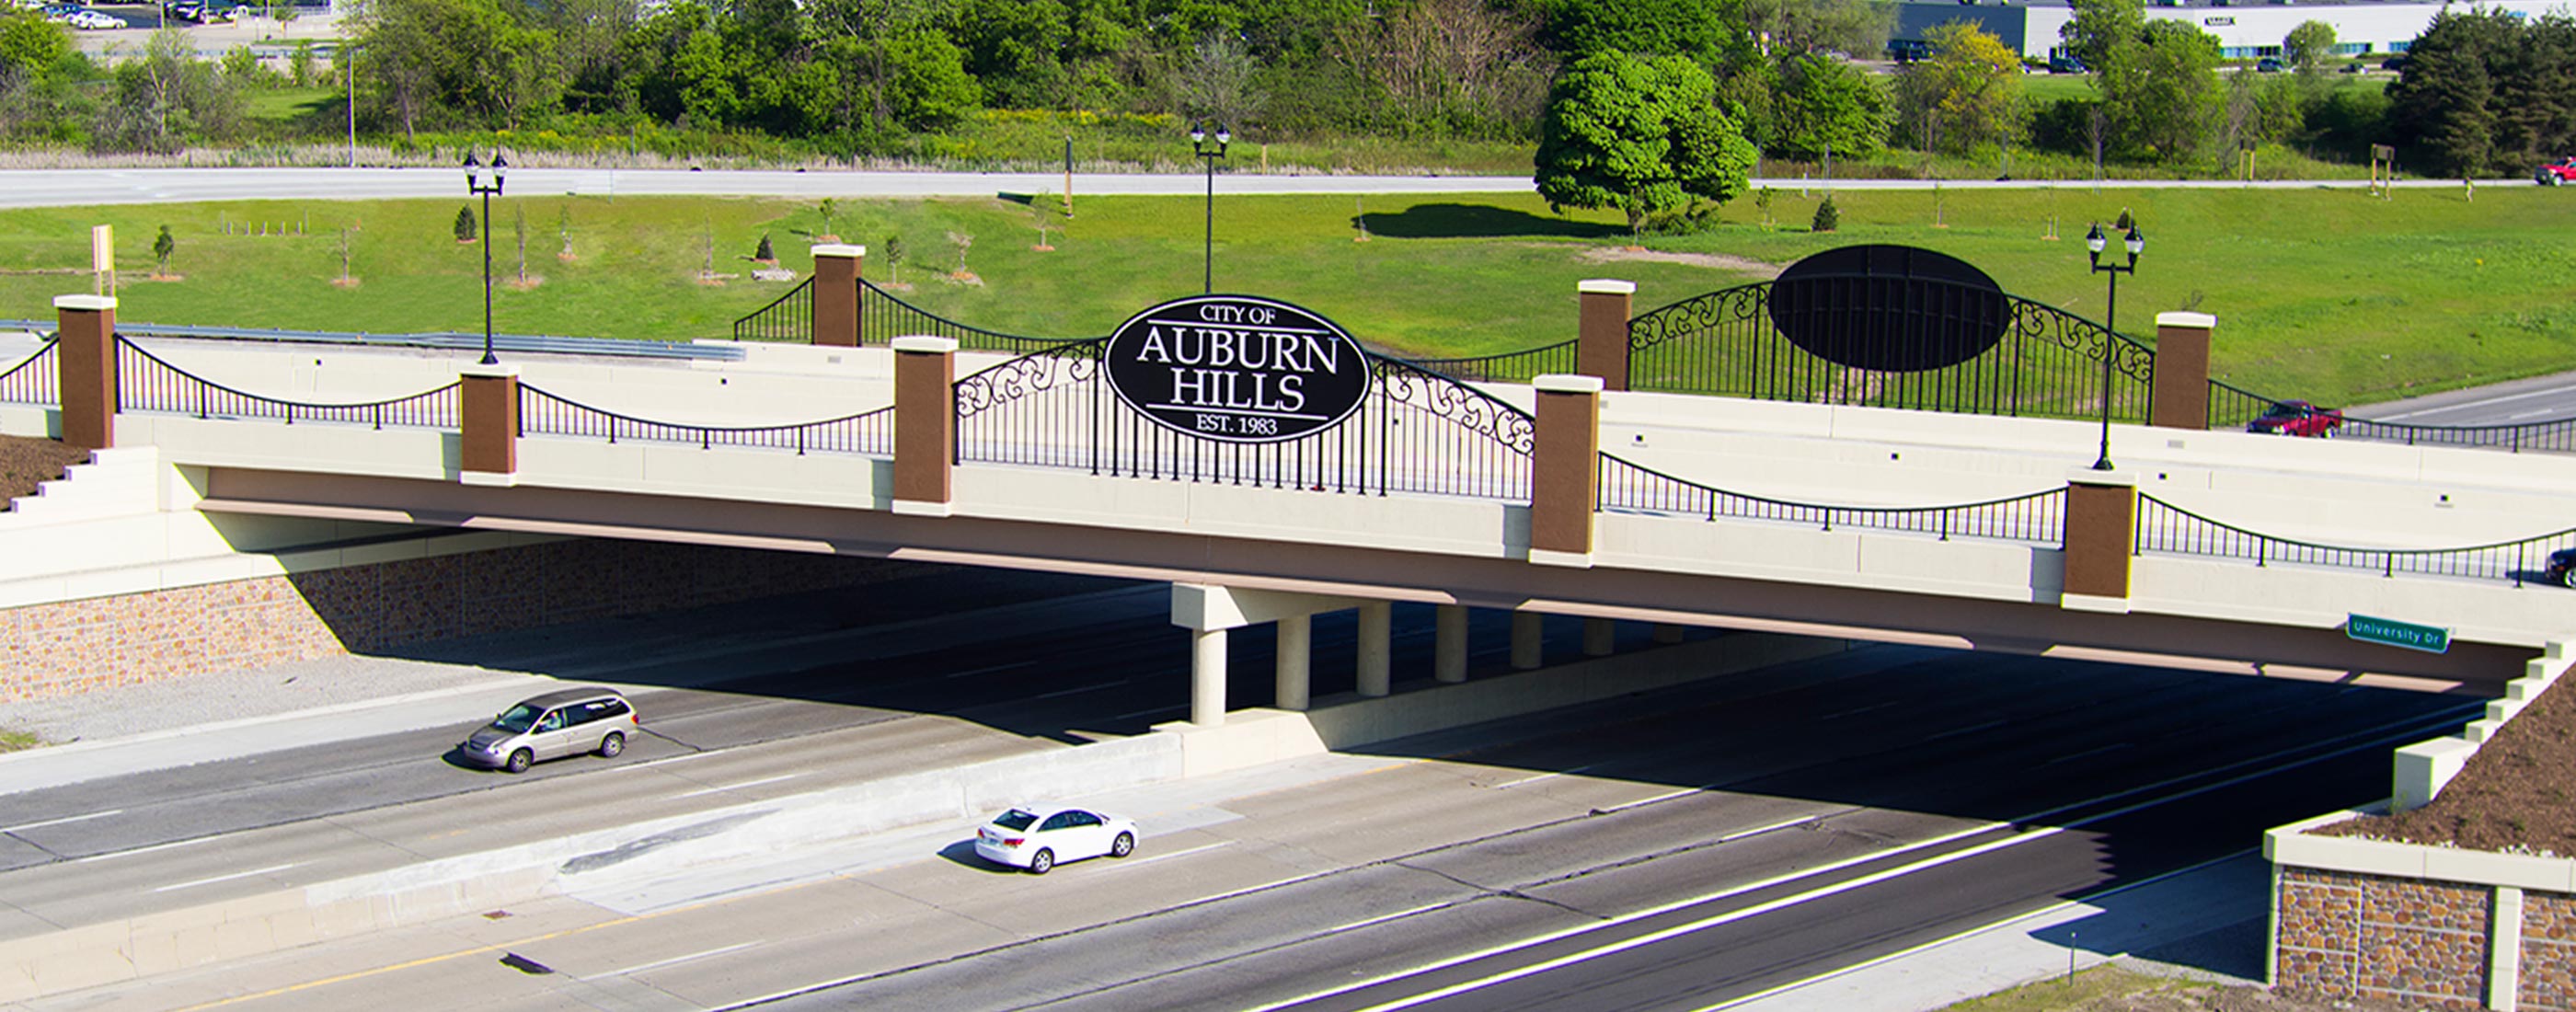 The main entryway to Auburn Hills, MI, redesigned by OHM Advisors, allows pedestrians to cross the bridge over I-75 safely.